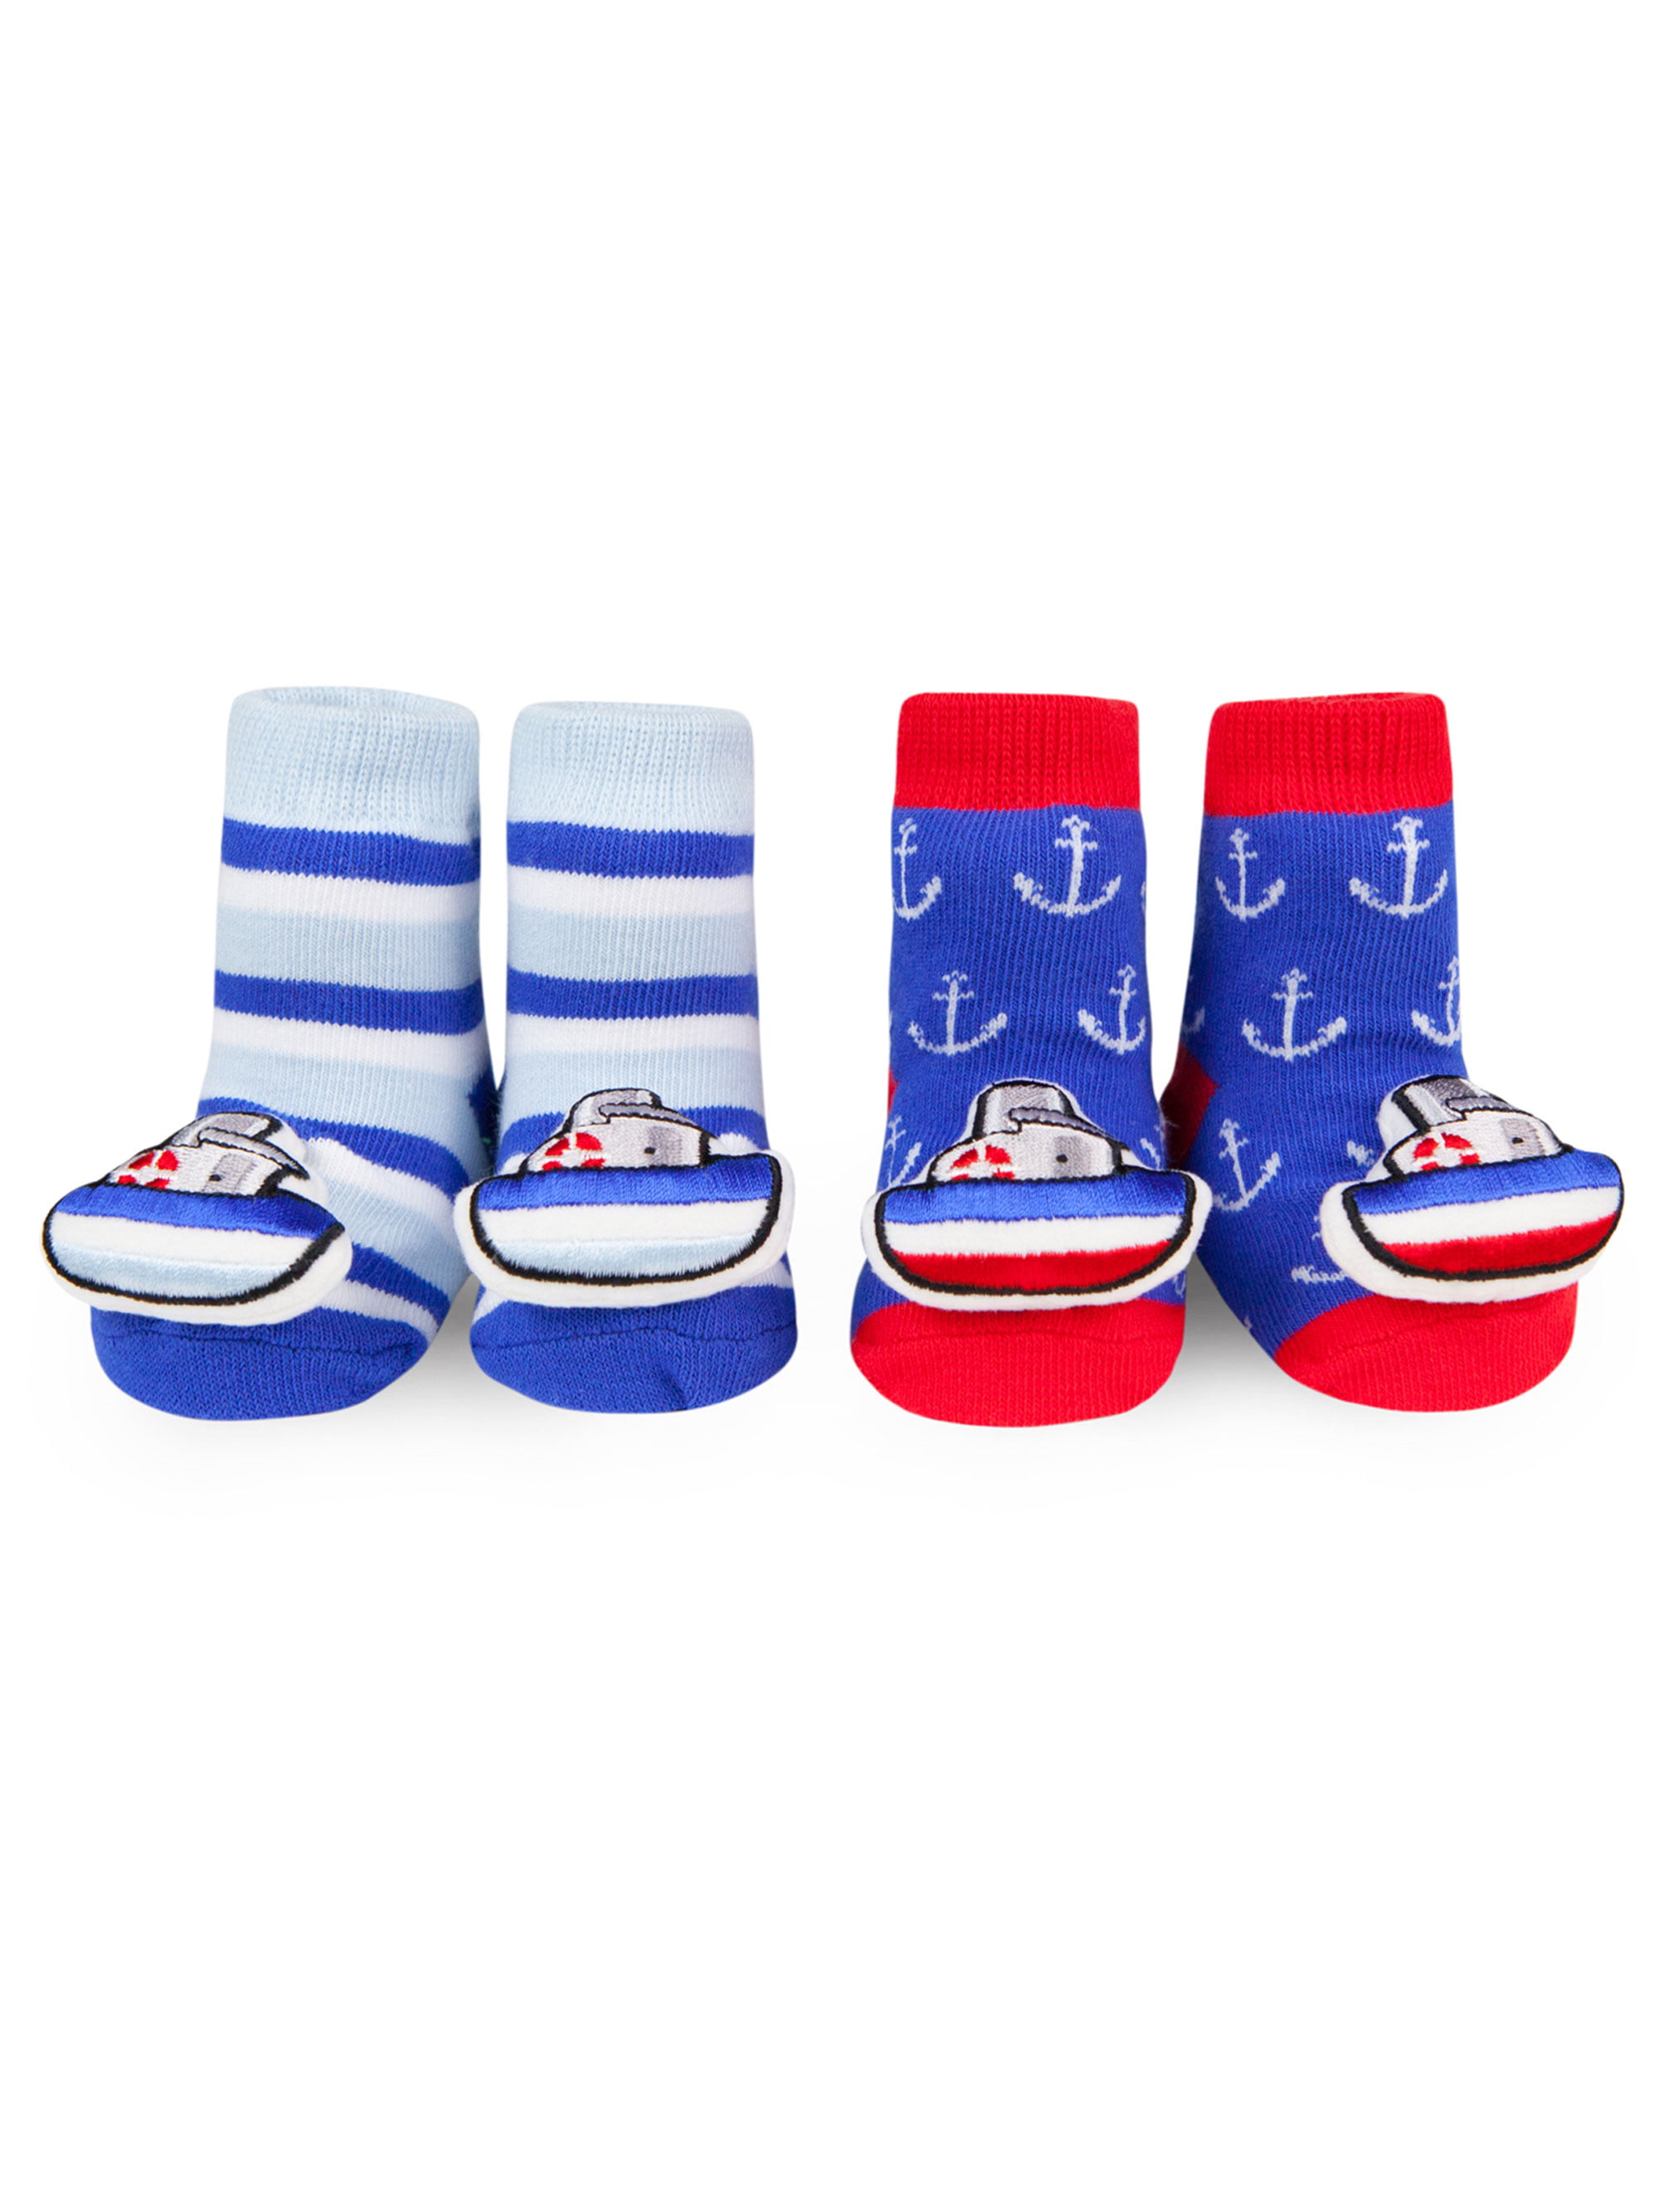 BABY BOY BOYS SOCKS PACK OF 2 0-12 MONTHS BLUE WHITE RED 2 Pairs 